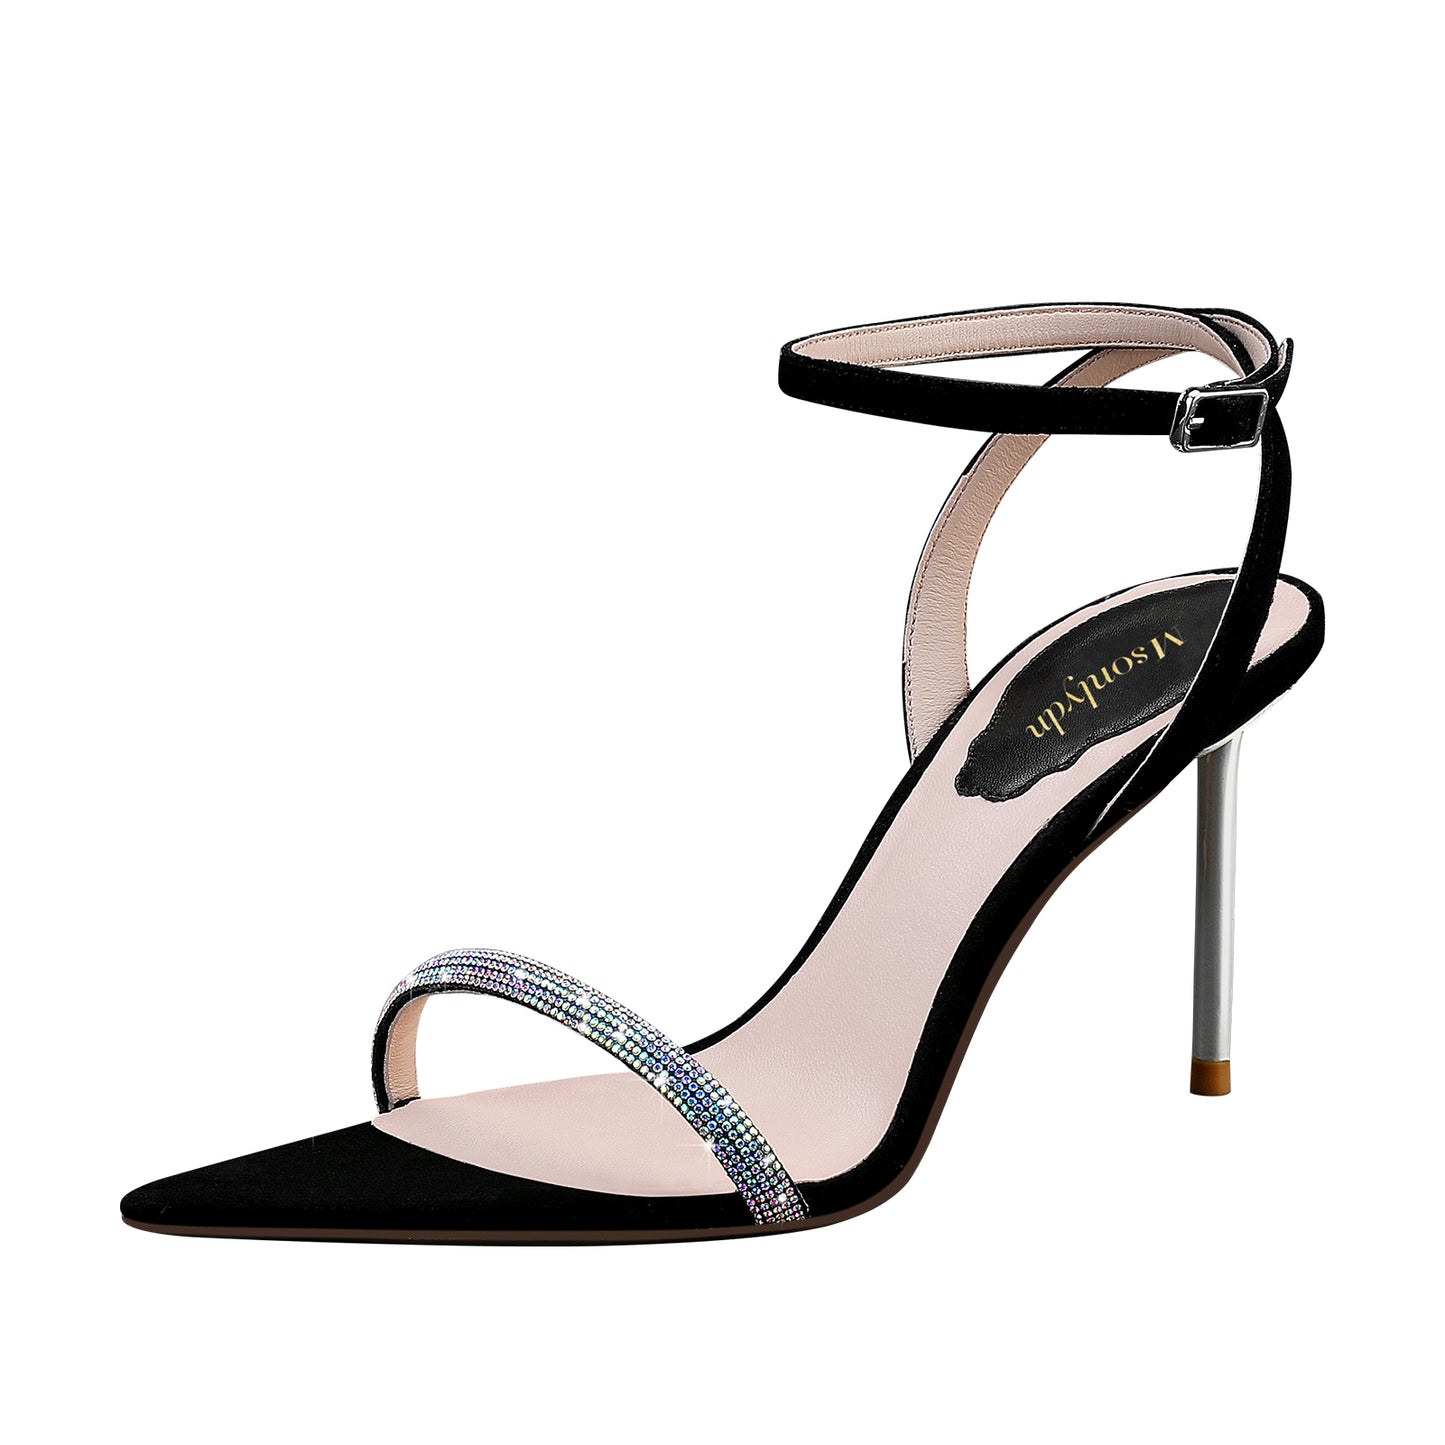 Rhinestone Heeled Sandals with Black Leather Suede and Open Toe Ankle Strap